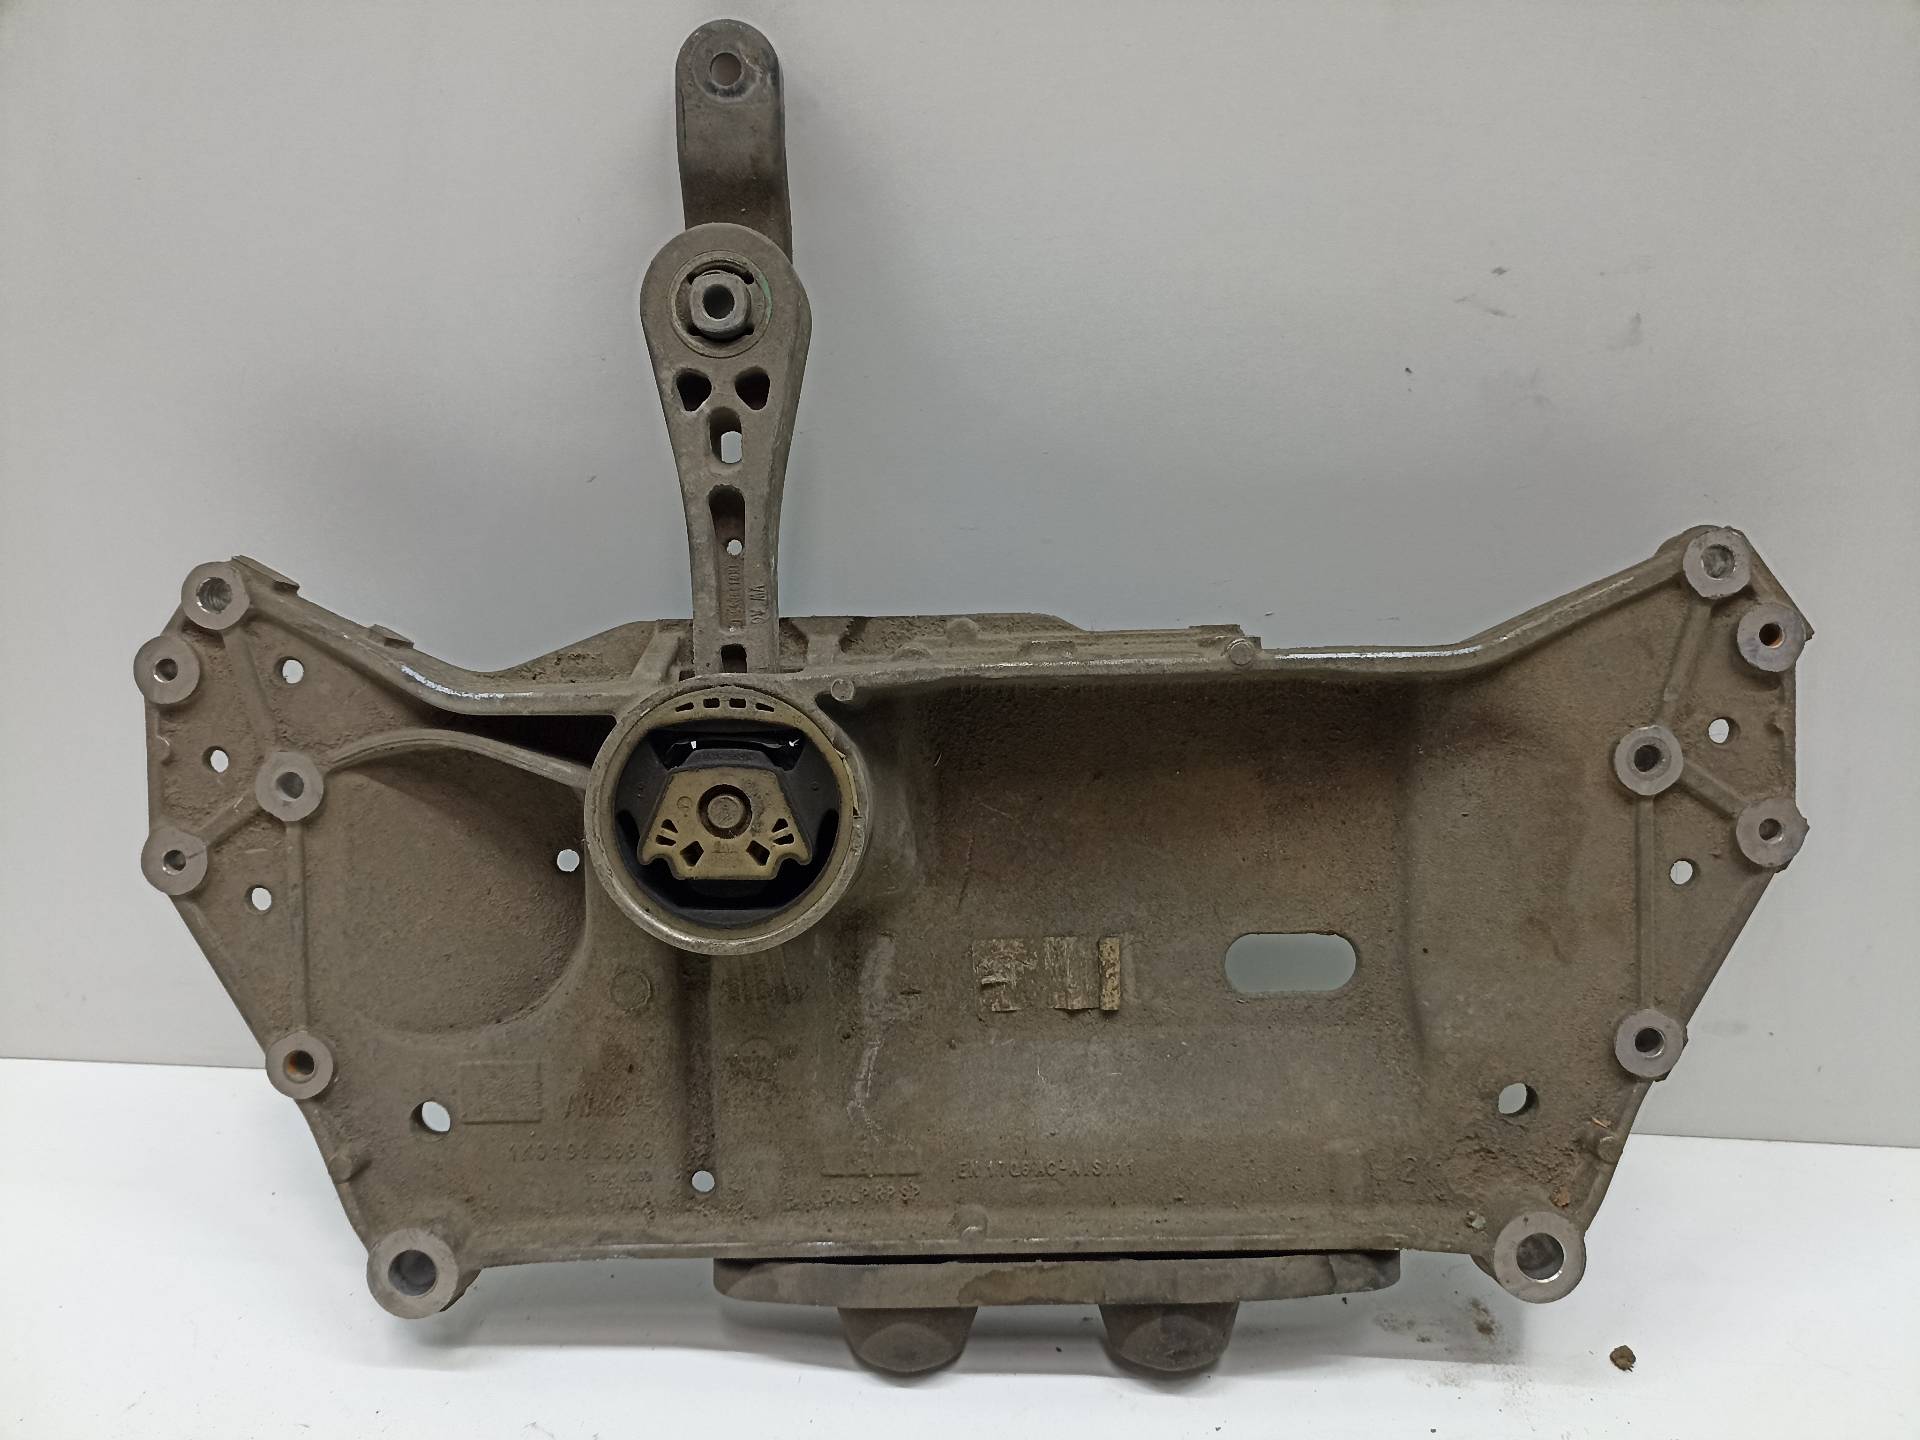 SEAT Leon 2 generation (2005-2012) Other Engine Compartment Parts 1K0199369G, 34956457360 24316368